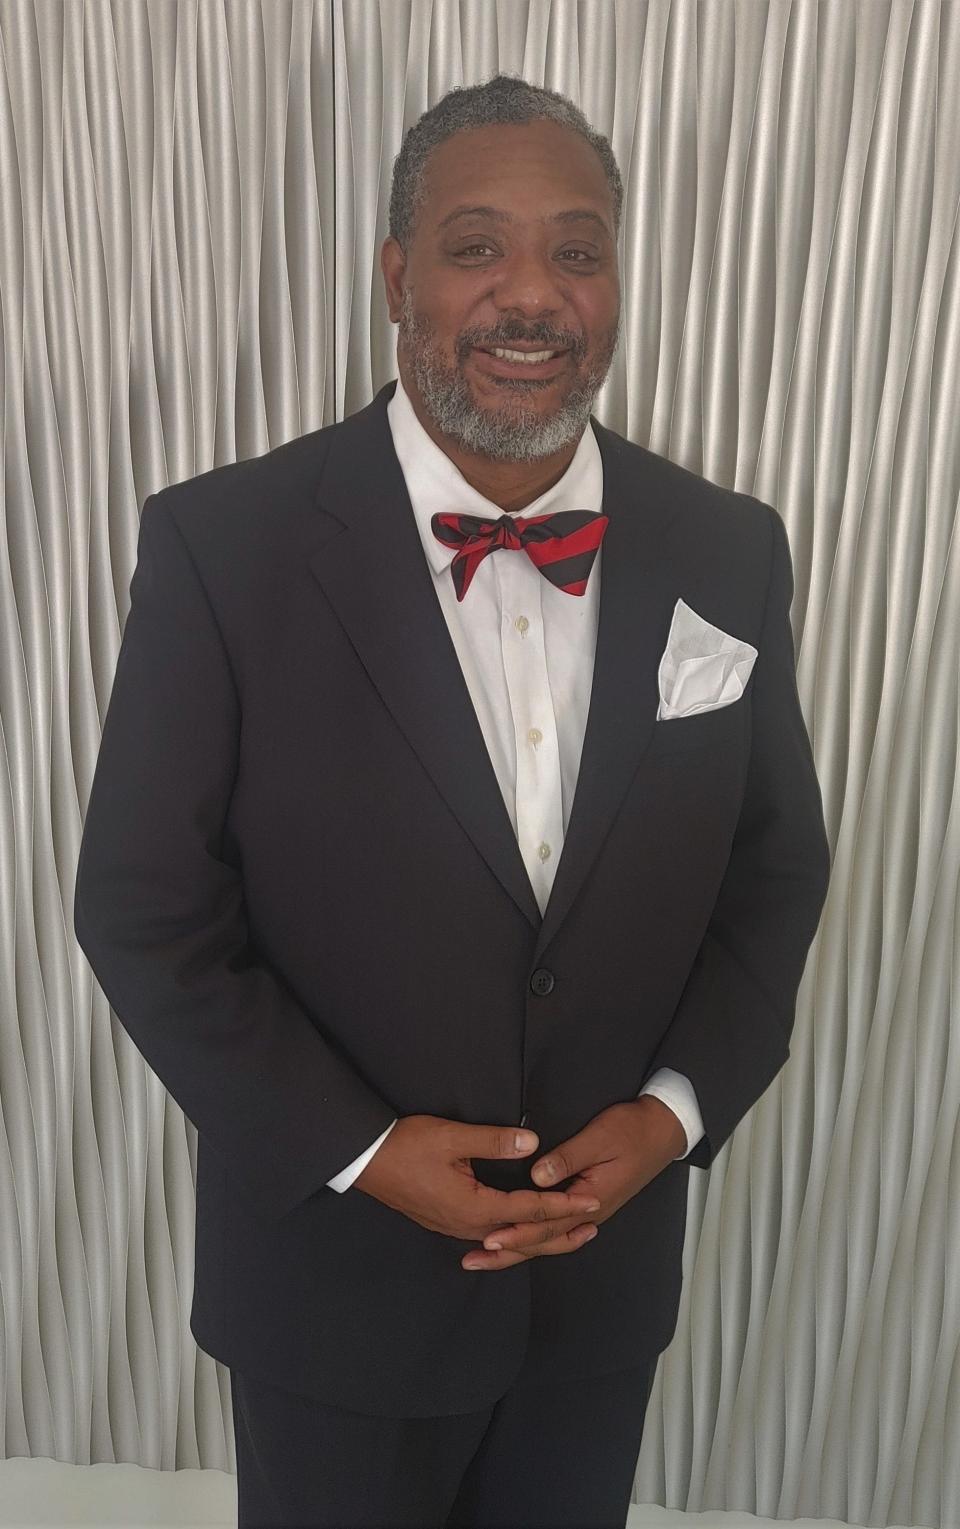 Rodanial Ray Ransom is seeking election to the District 2 seat on the Memphis City Council in the Oct. 5, 2023 election.